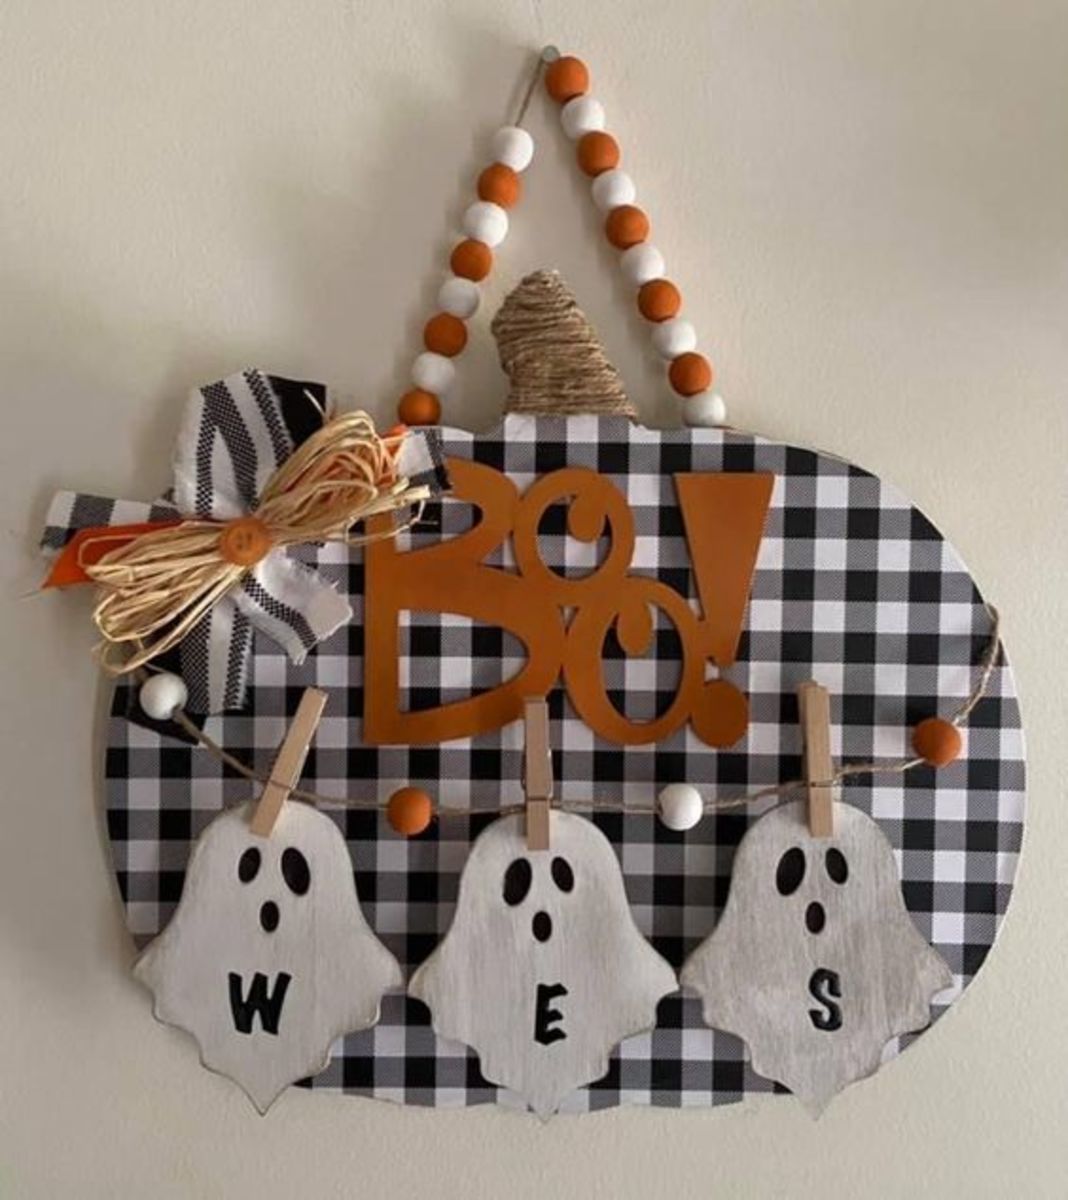 Black Gingham "Boo!" Sign With Wee Ghosties